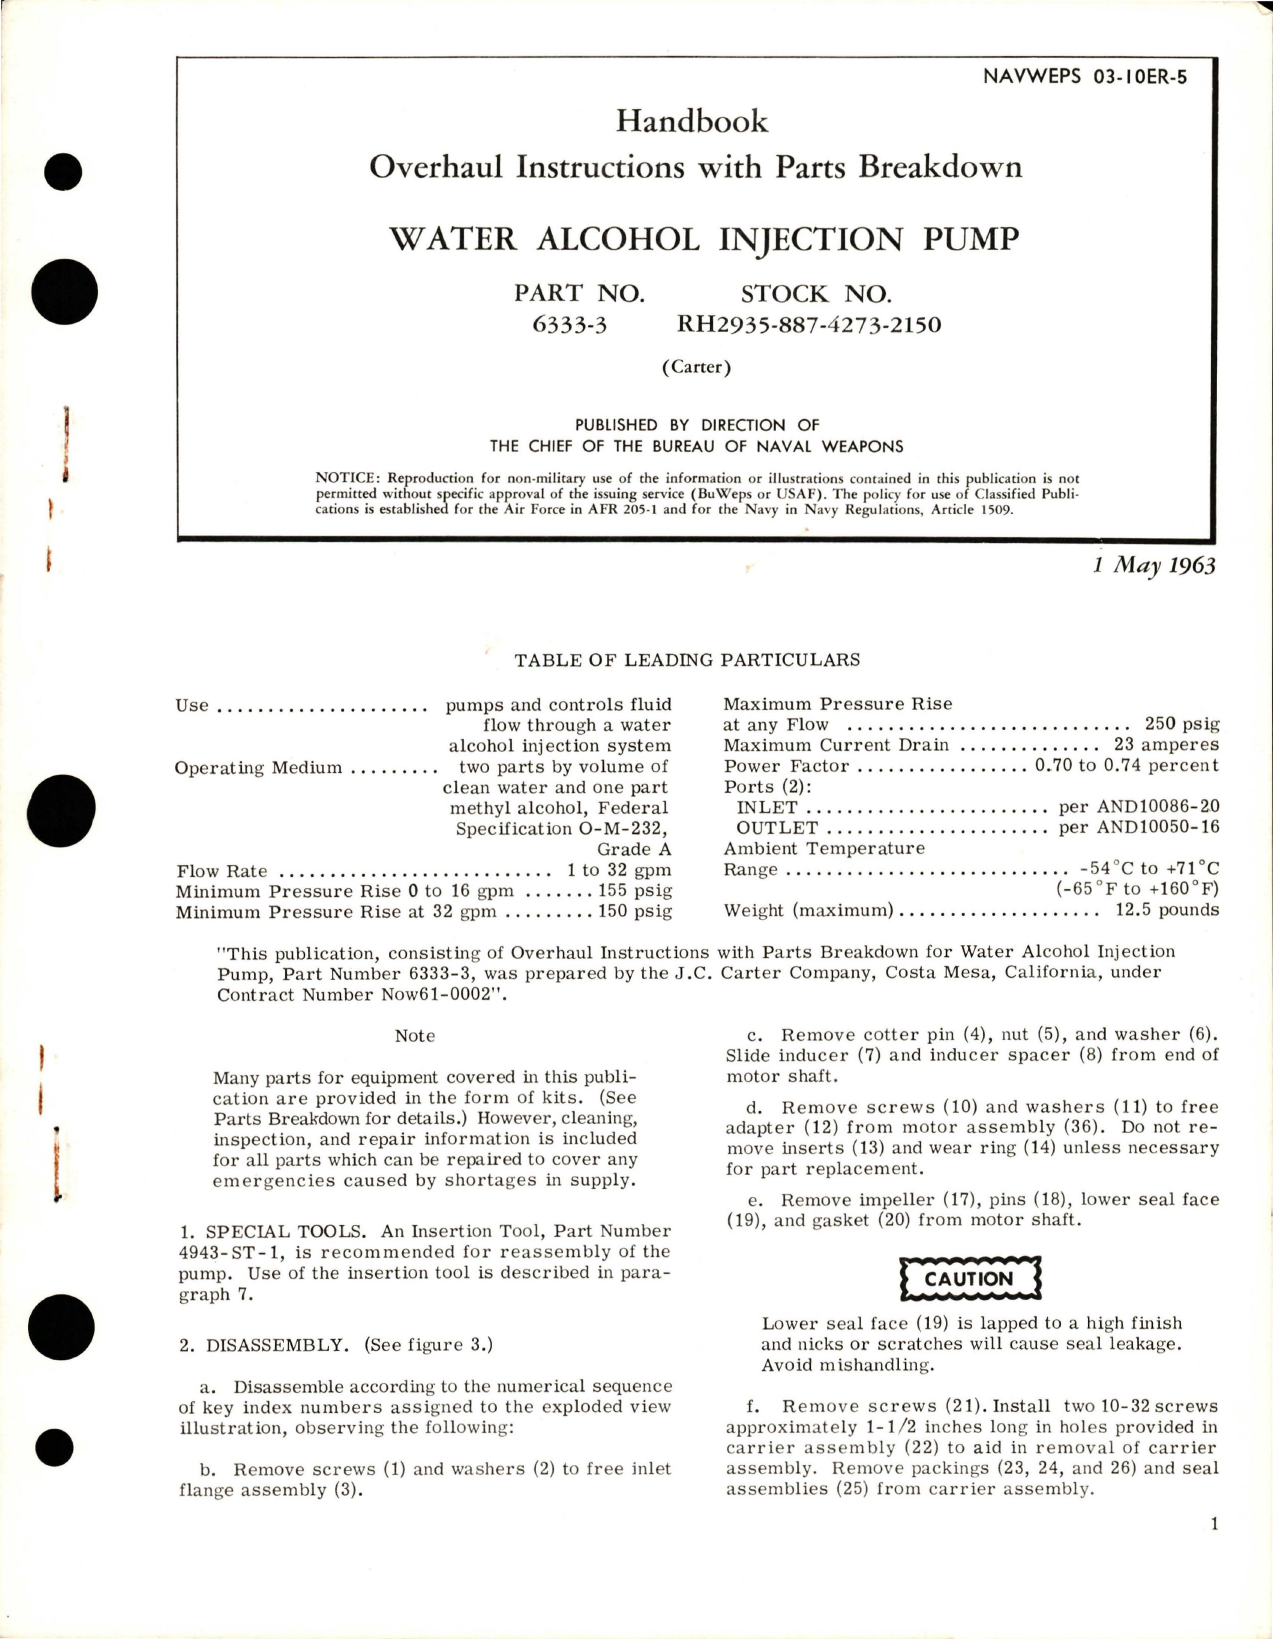 Sample page 1 from AirCorps Library document: Overhaul Instructions with Parts Breakdown for Water Alcohol Injection Pump - Part 6333-3